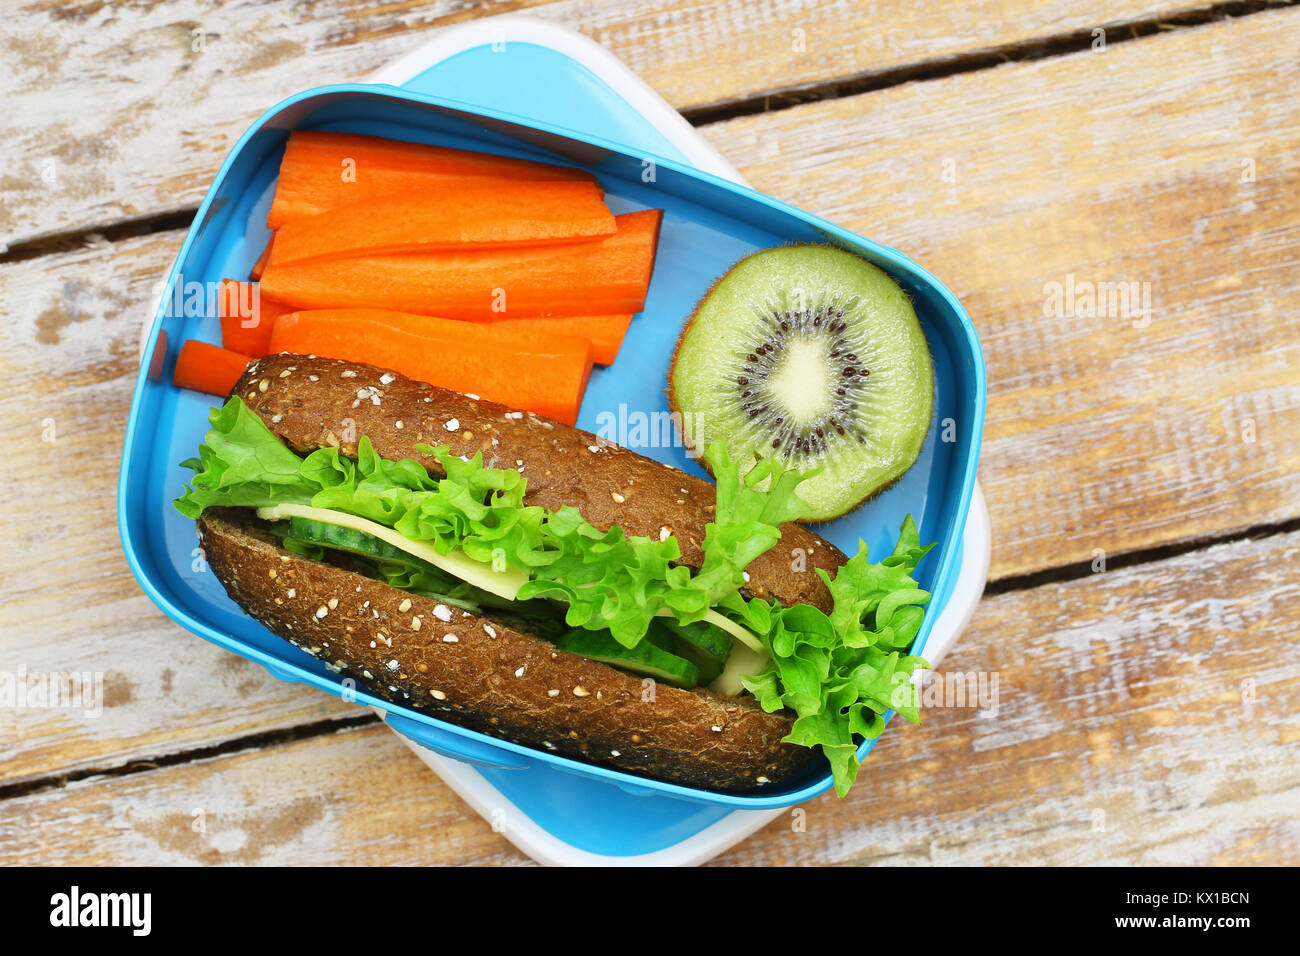 Healthy lunch box containing brown cheese sandwich, crunchy carrots and kiwi fruit Stock Photo